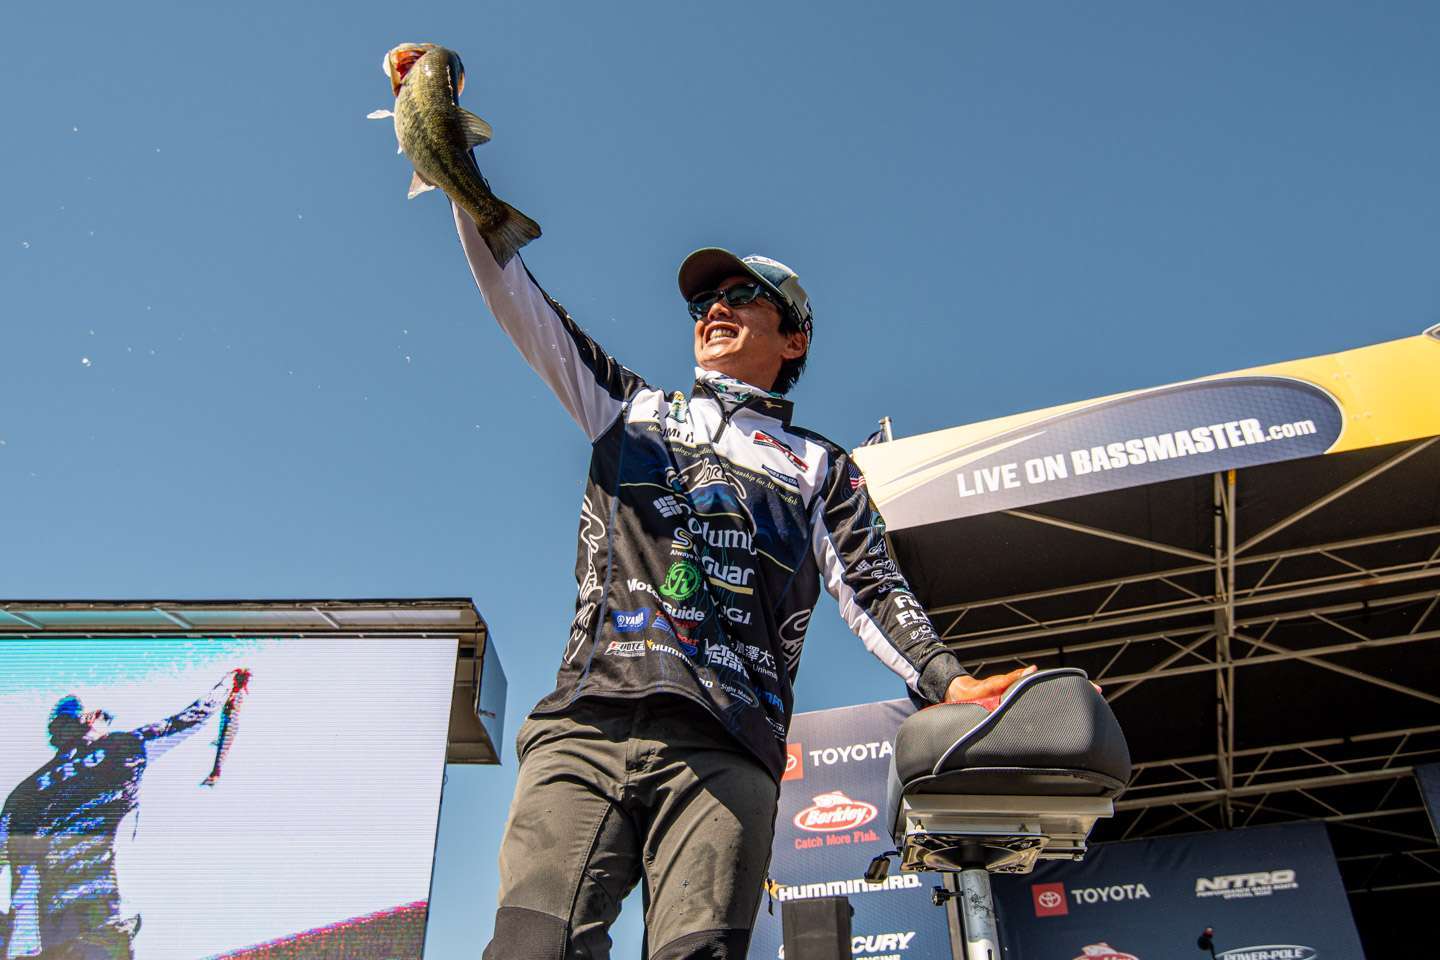 Ito, who was finesse fishing structure like he learned from highly pressured fisheries in his home country, again brought in the biggest bass on Day 4, a 3-7 that added $2,000 in bonus money from Phoenix Boats to his $30,000 payday for taking third. His finish allowed a big move in the AOY, from 60th to 37th, inside the Classic cut.